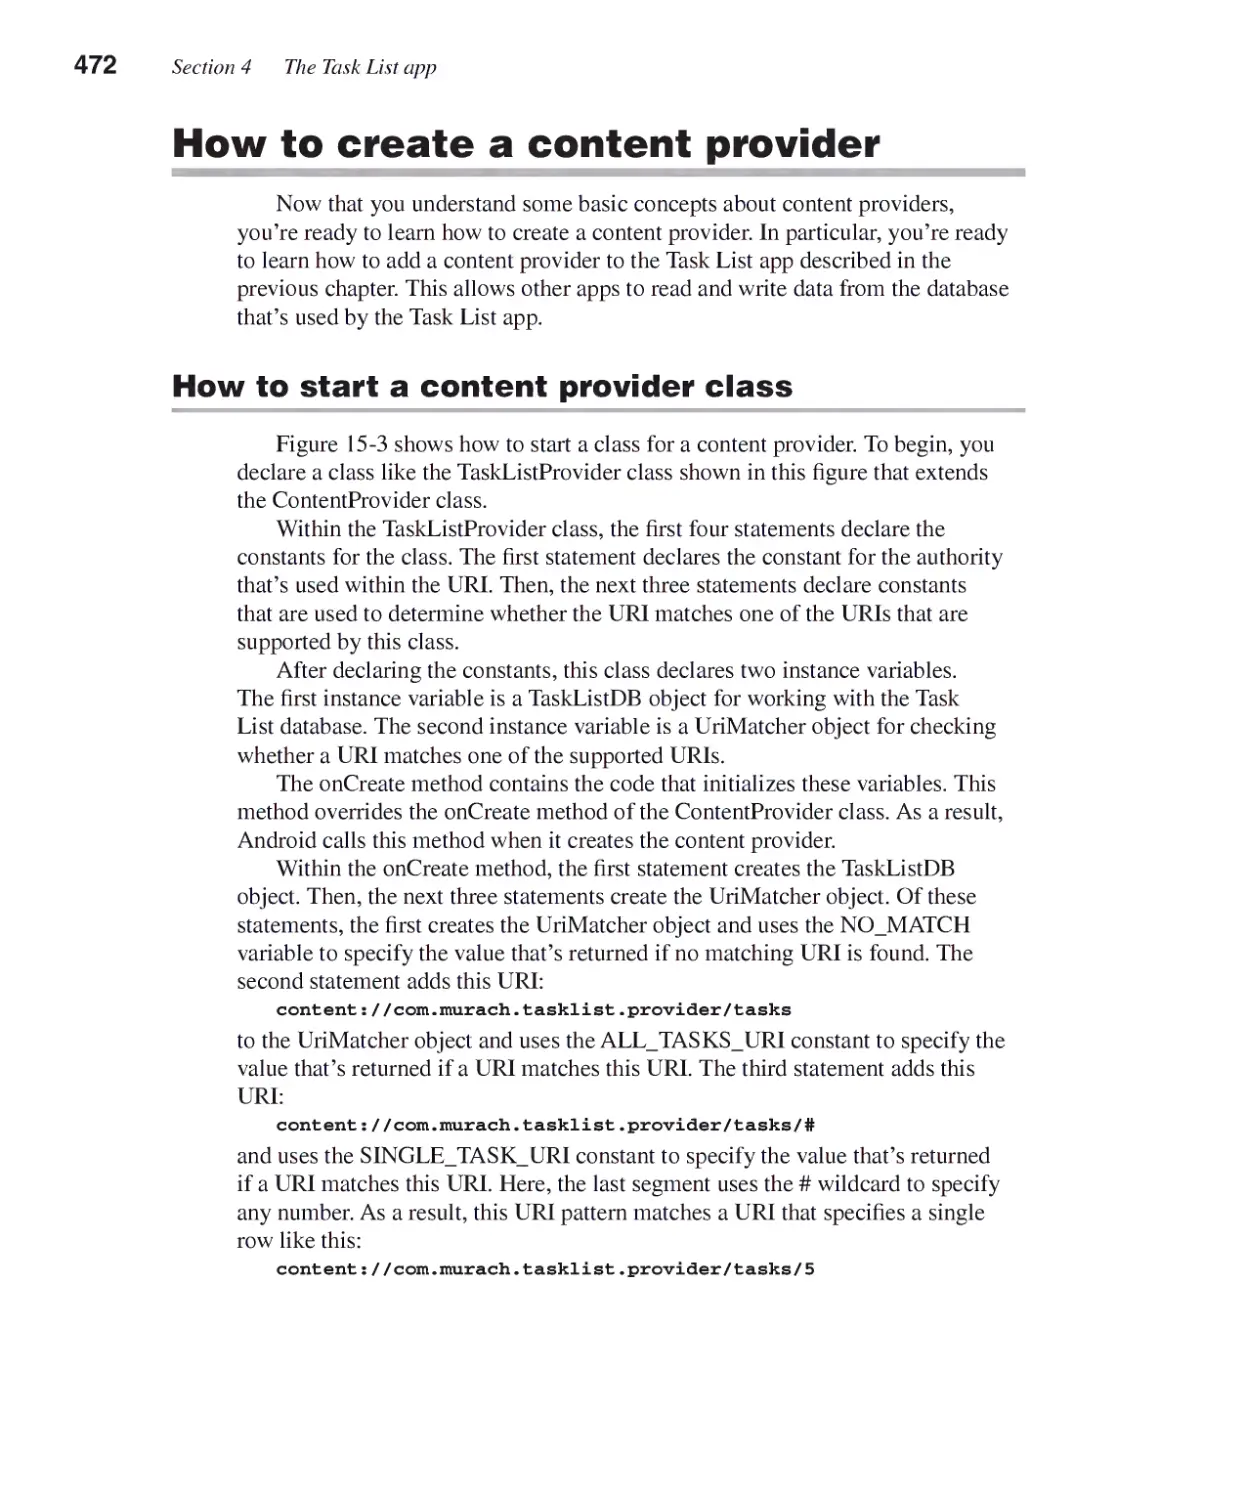 How to Create a Content Provider